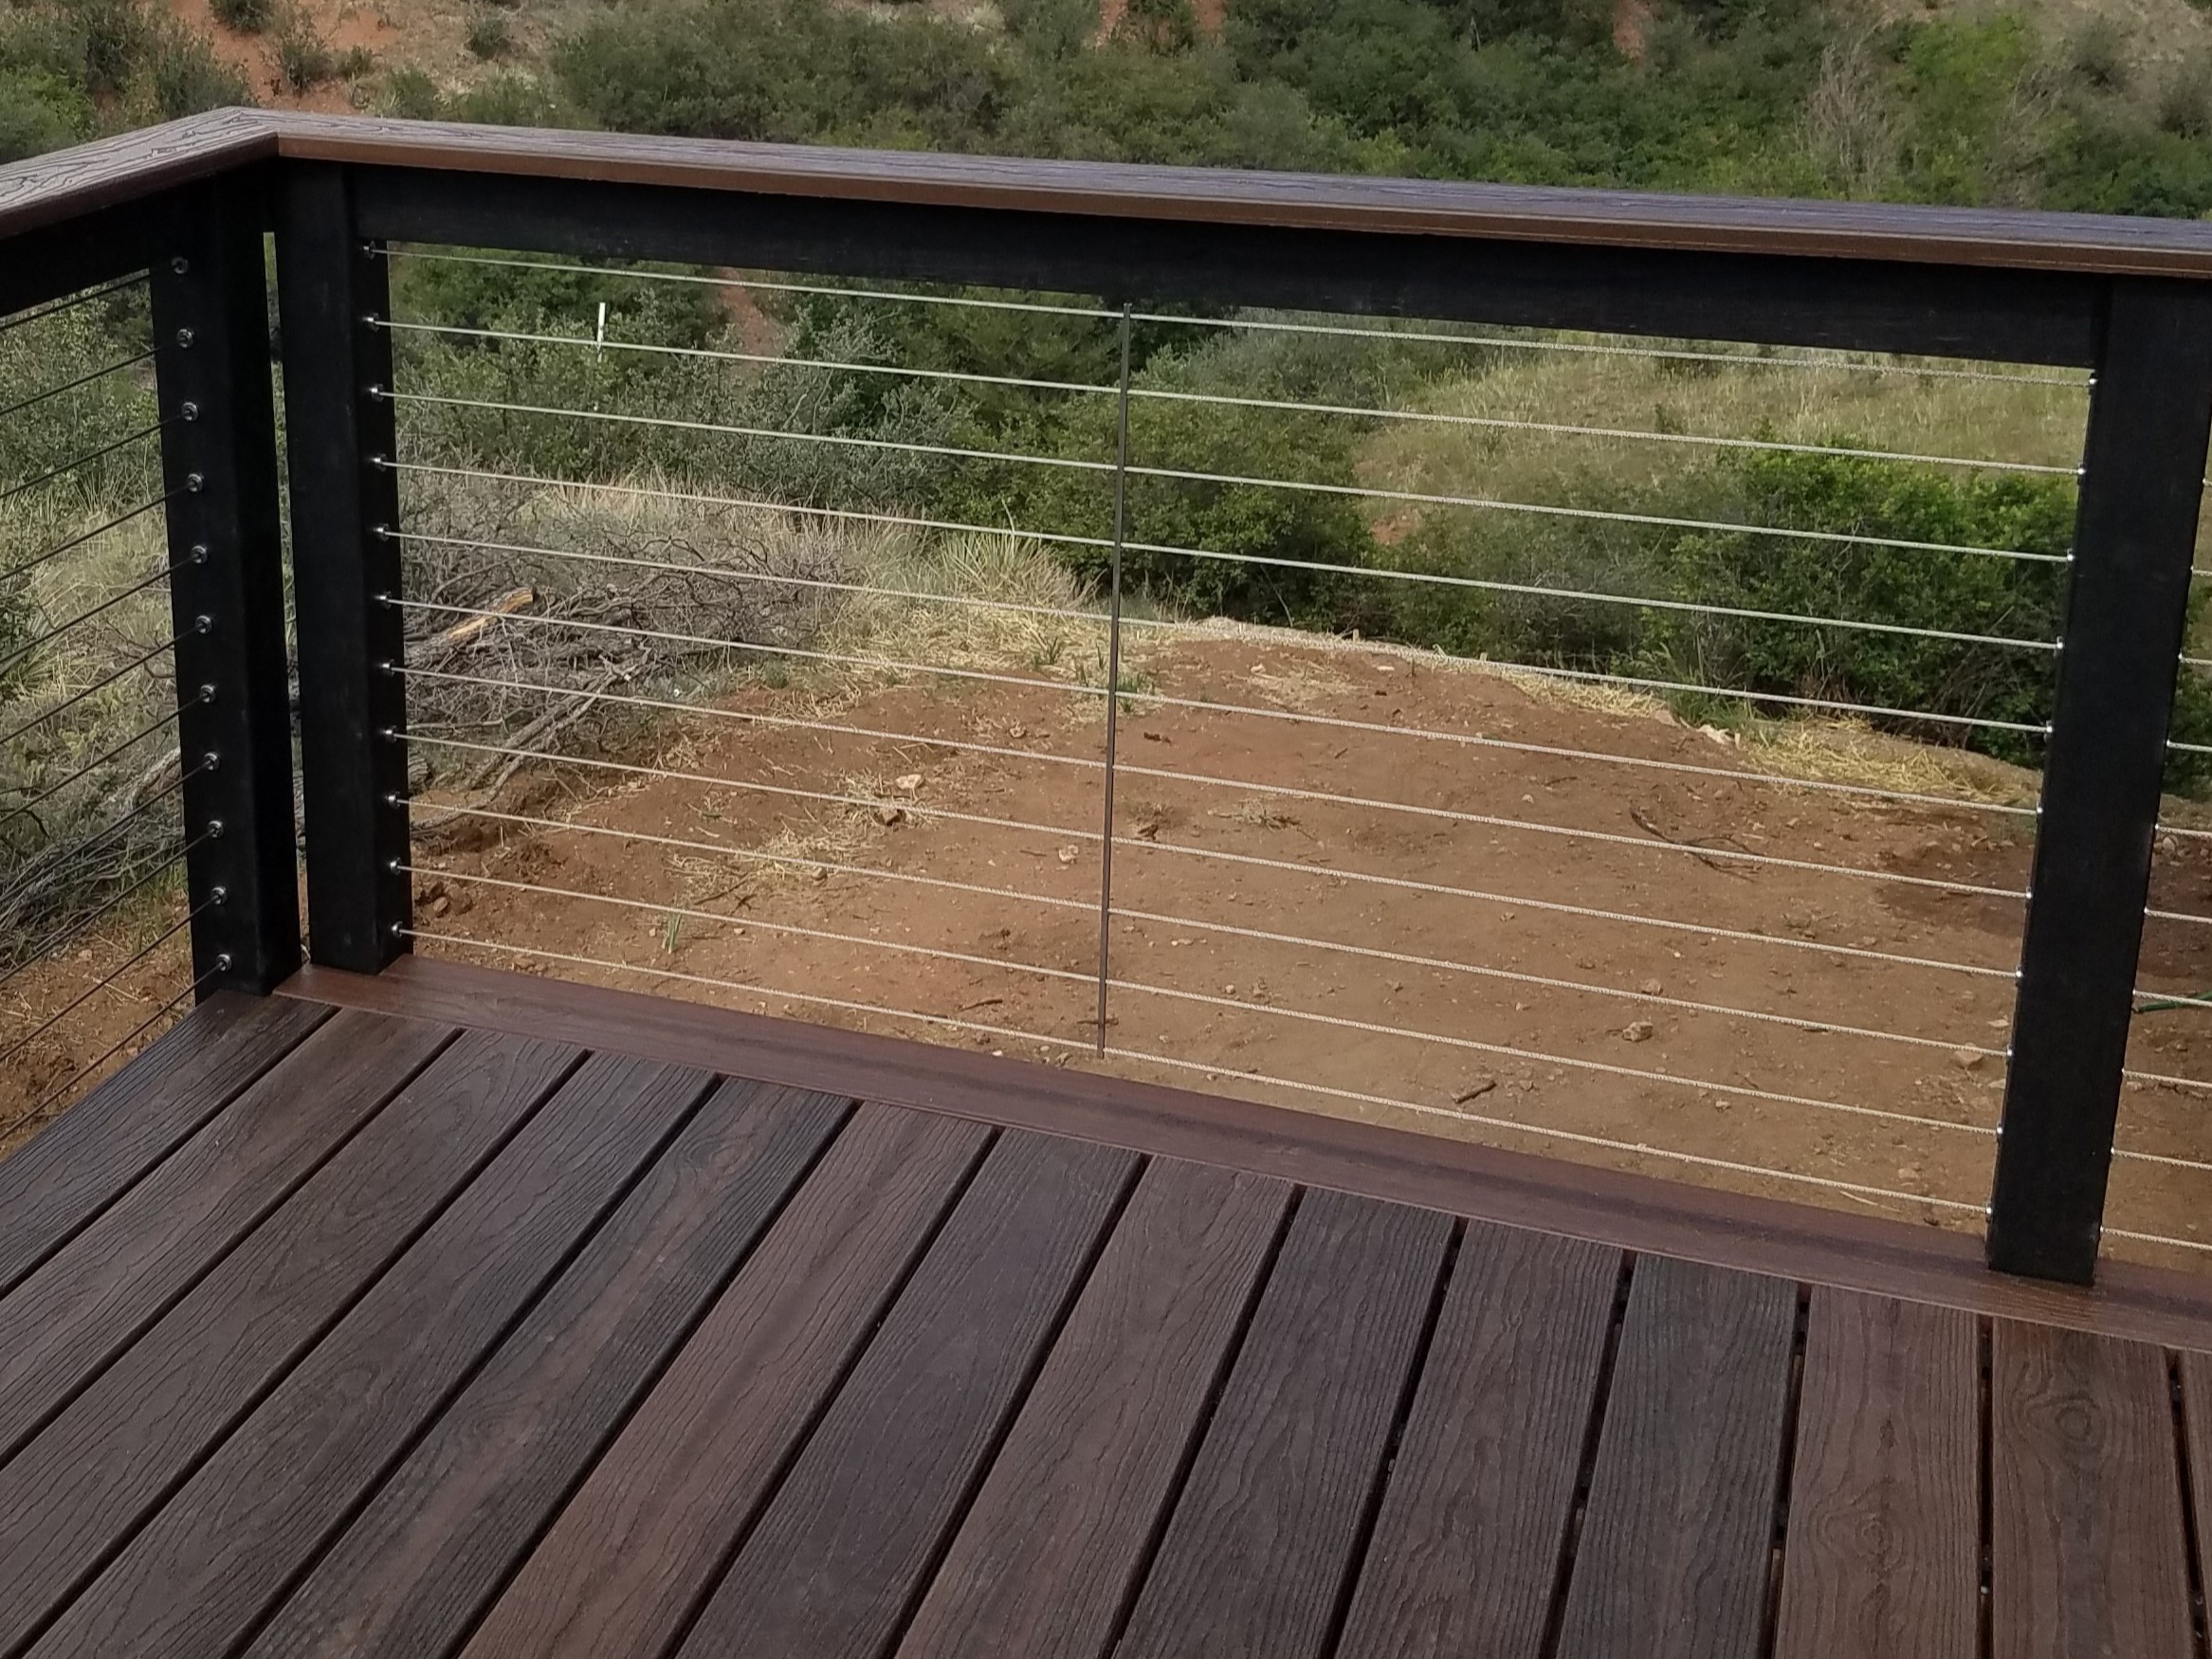 Composite deck with end boards. The railing features composite components and vertical steel cables.